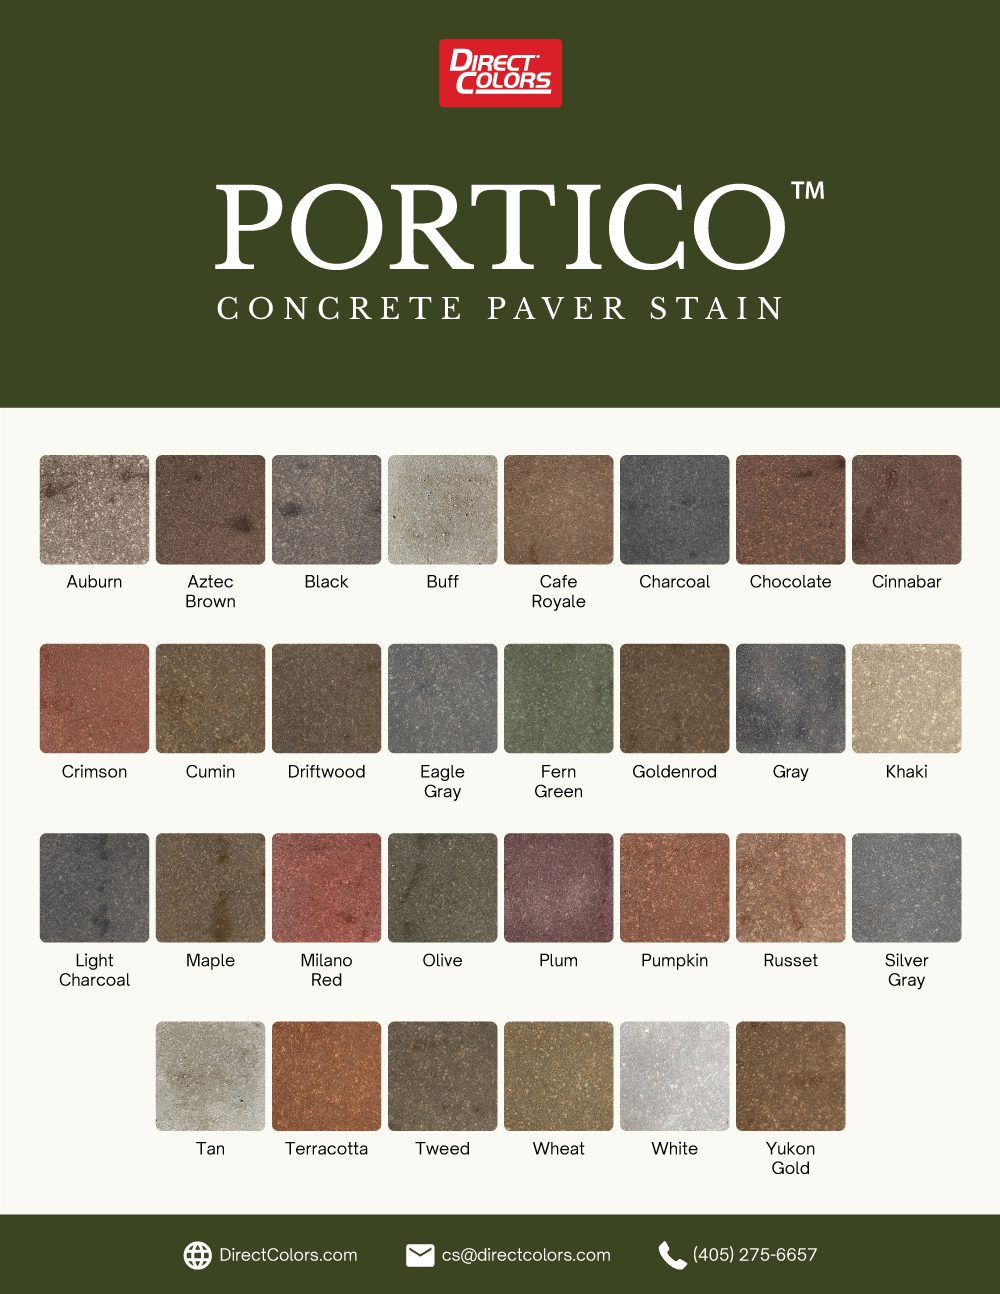 Portico™ Paver Stain Color Chart